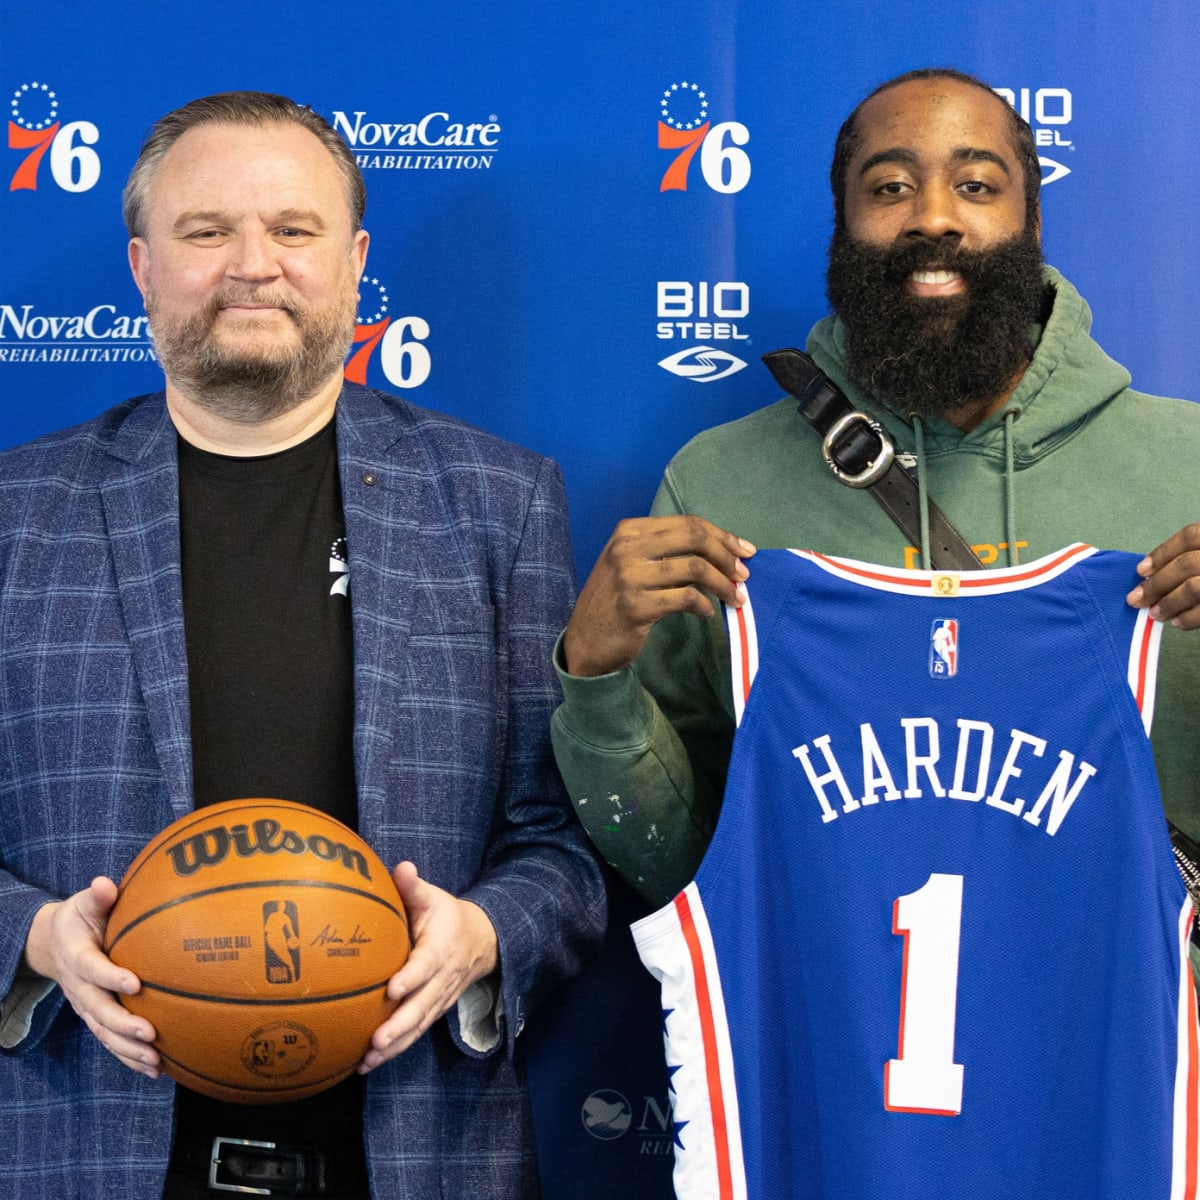 NBA Mailbag: Will James Harden find success with 76ers?